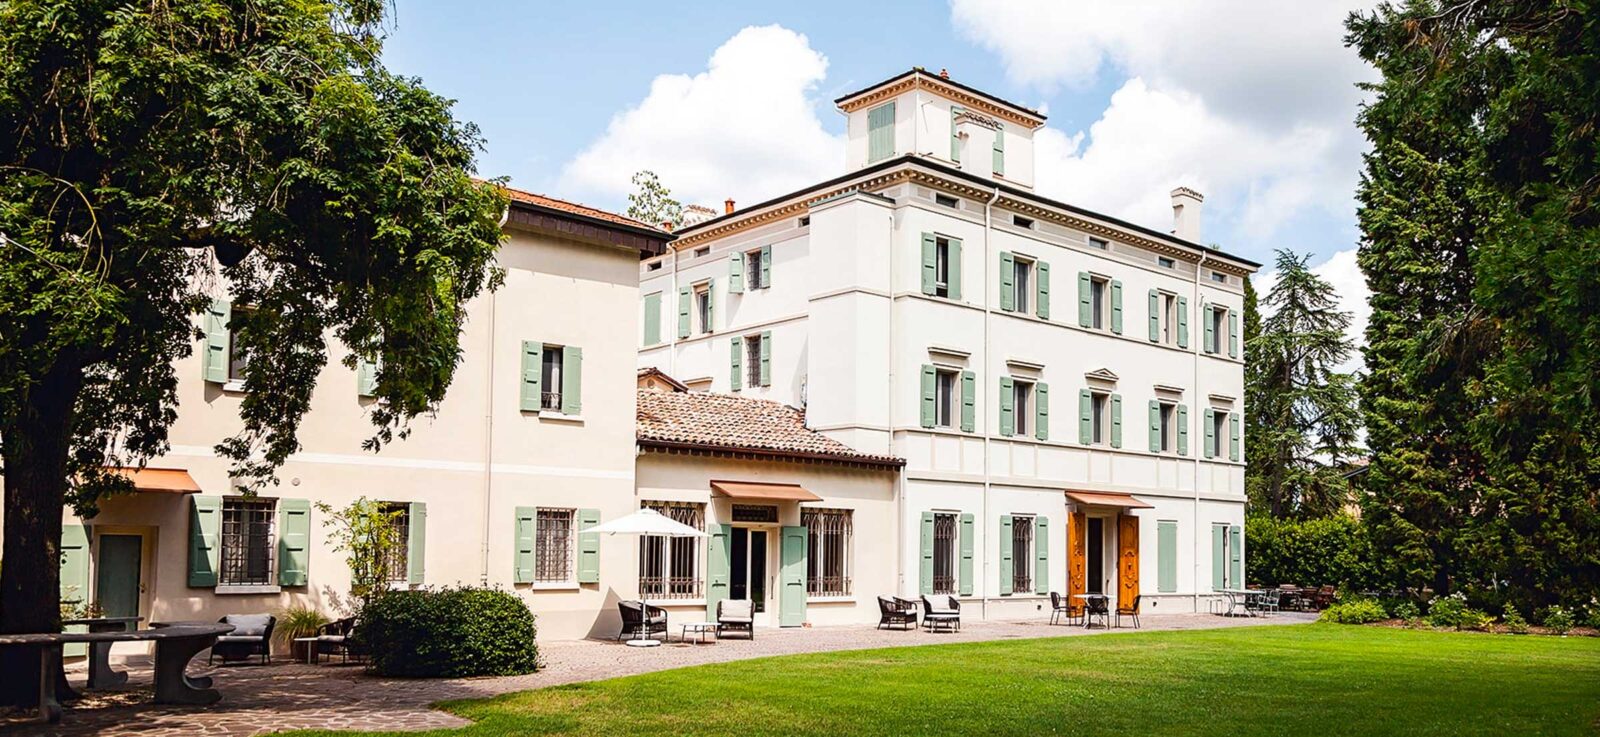 Casa Maria - Embark on the Ultimate Italian Cooking Experience Through the Mind of Massimo Bottura